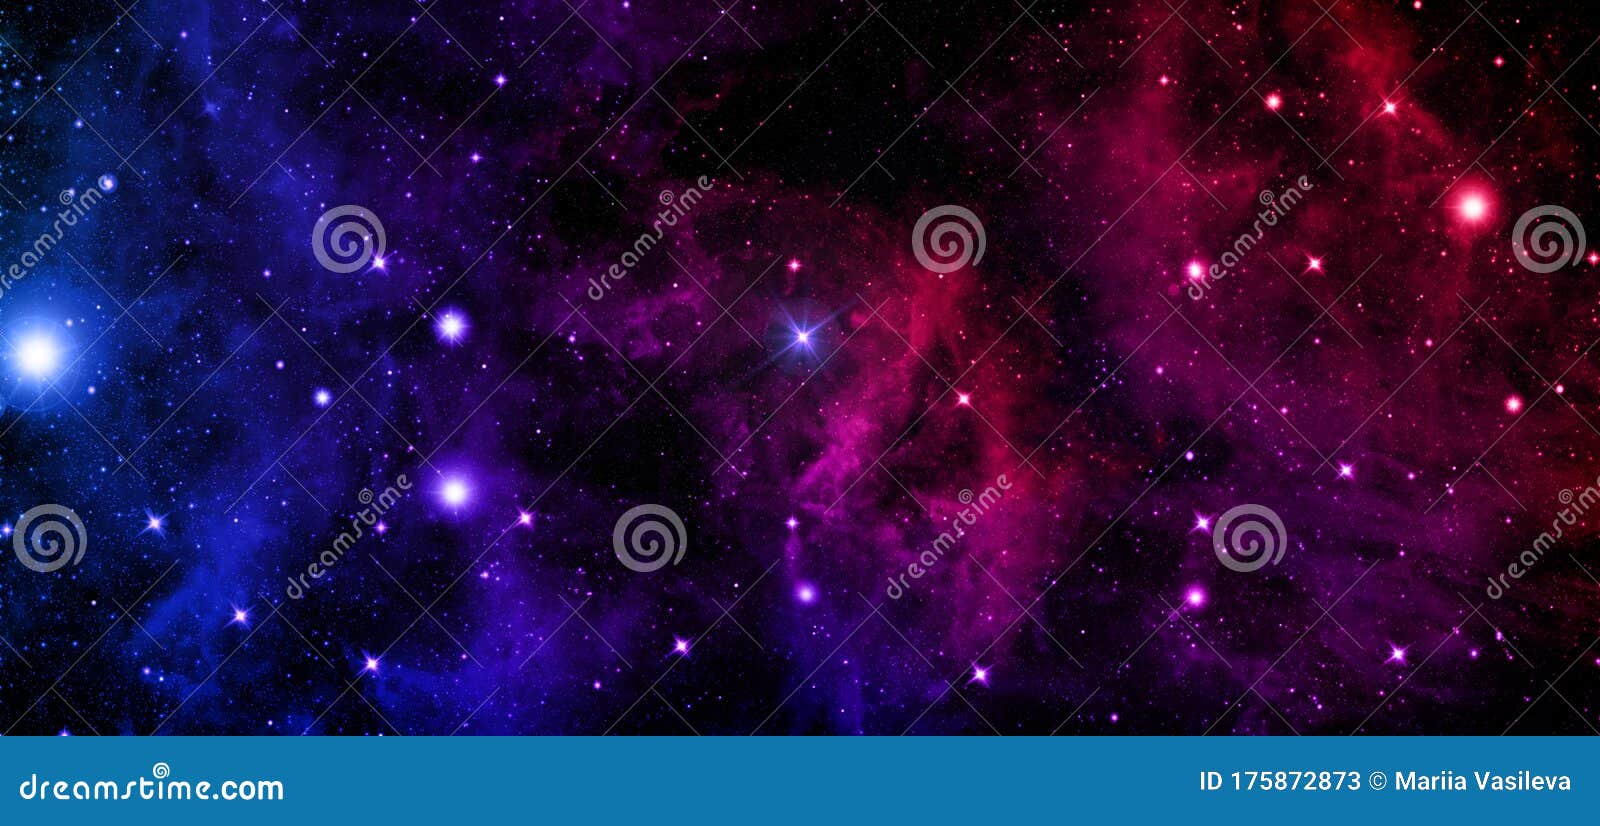 universe, nebula, cluster of stars, starry sky,outer space, radiance, red, blue, purple,black